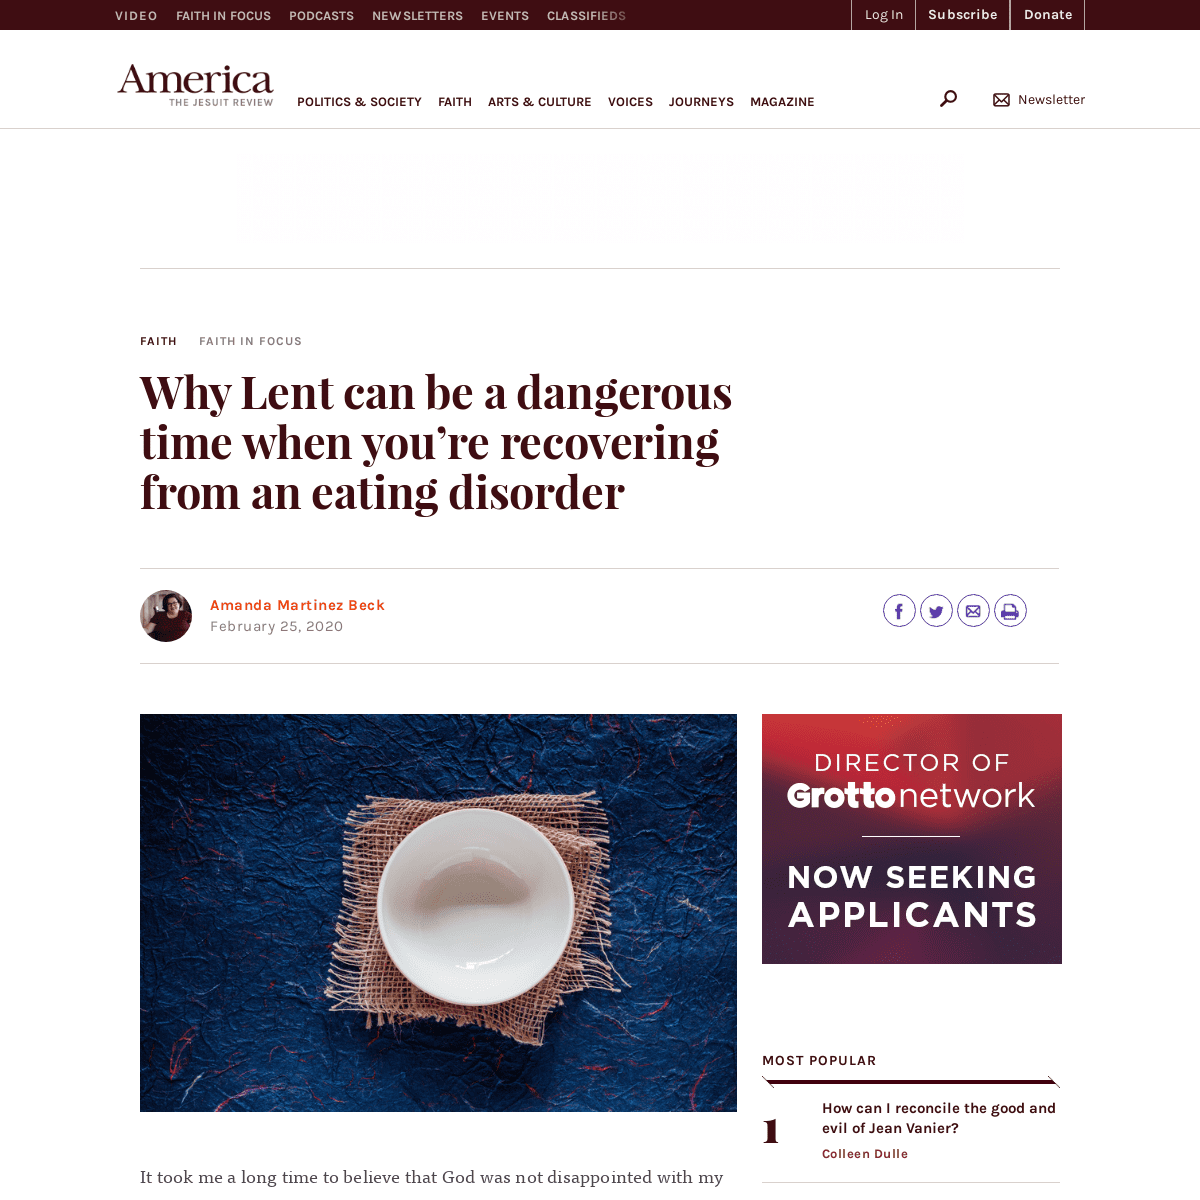 A complete backup of www.americamagazine.org/faith/2020/02/25/why-lent-can-be-dangerous-time-when-youre-recovering-eating-disord